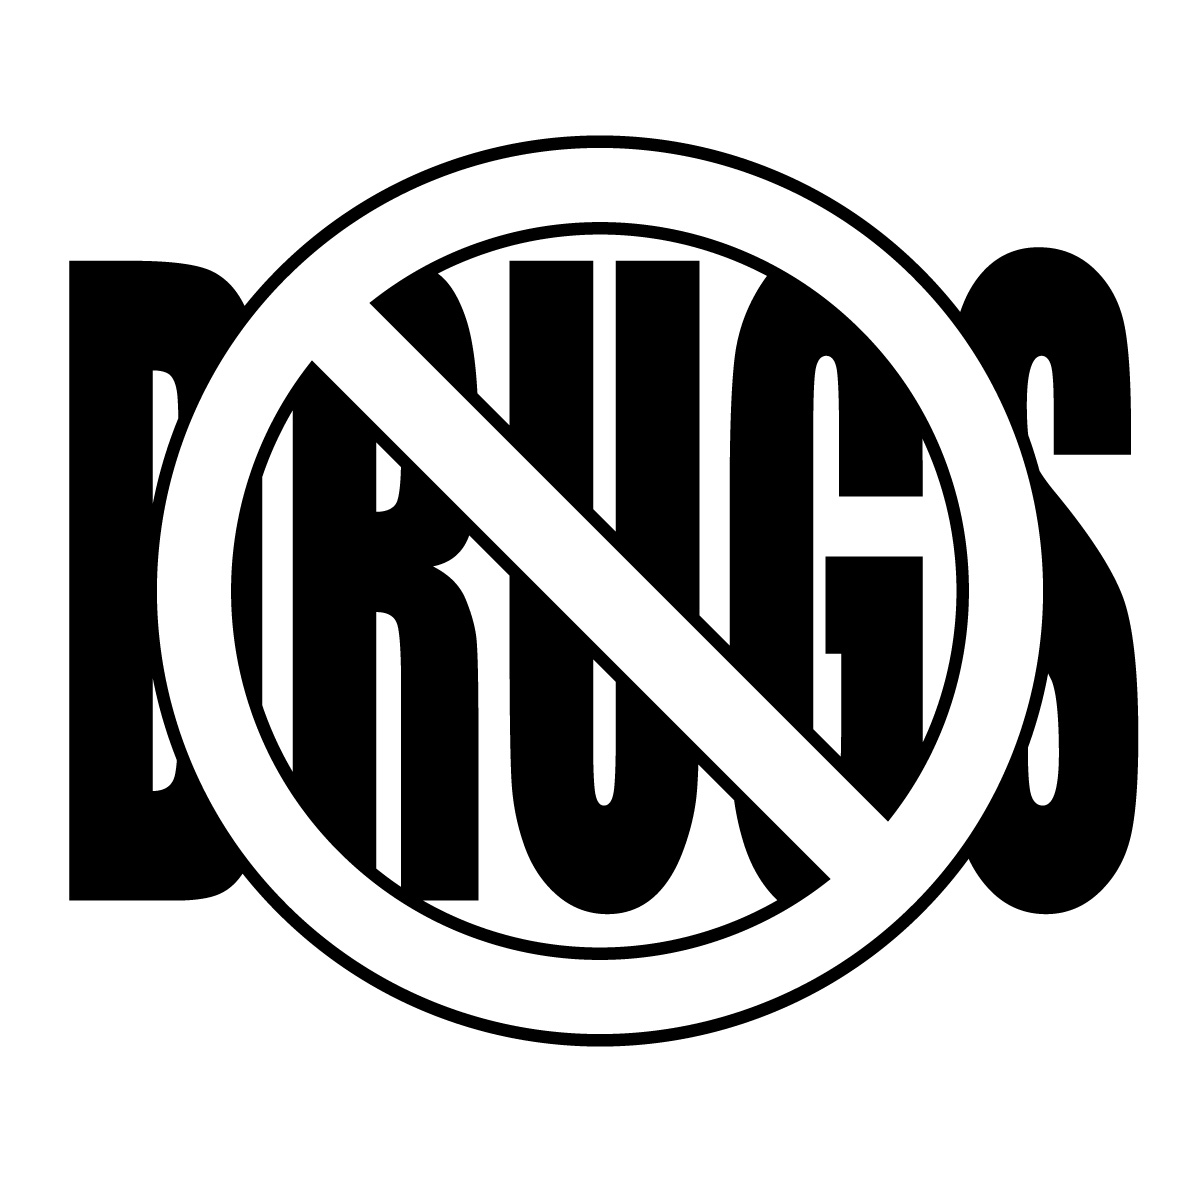 Just Say No To Drugs   The Black Sheep Thefts